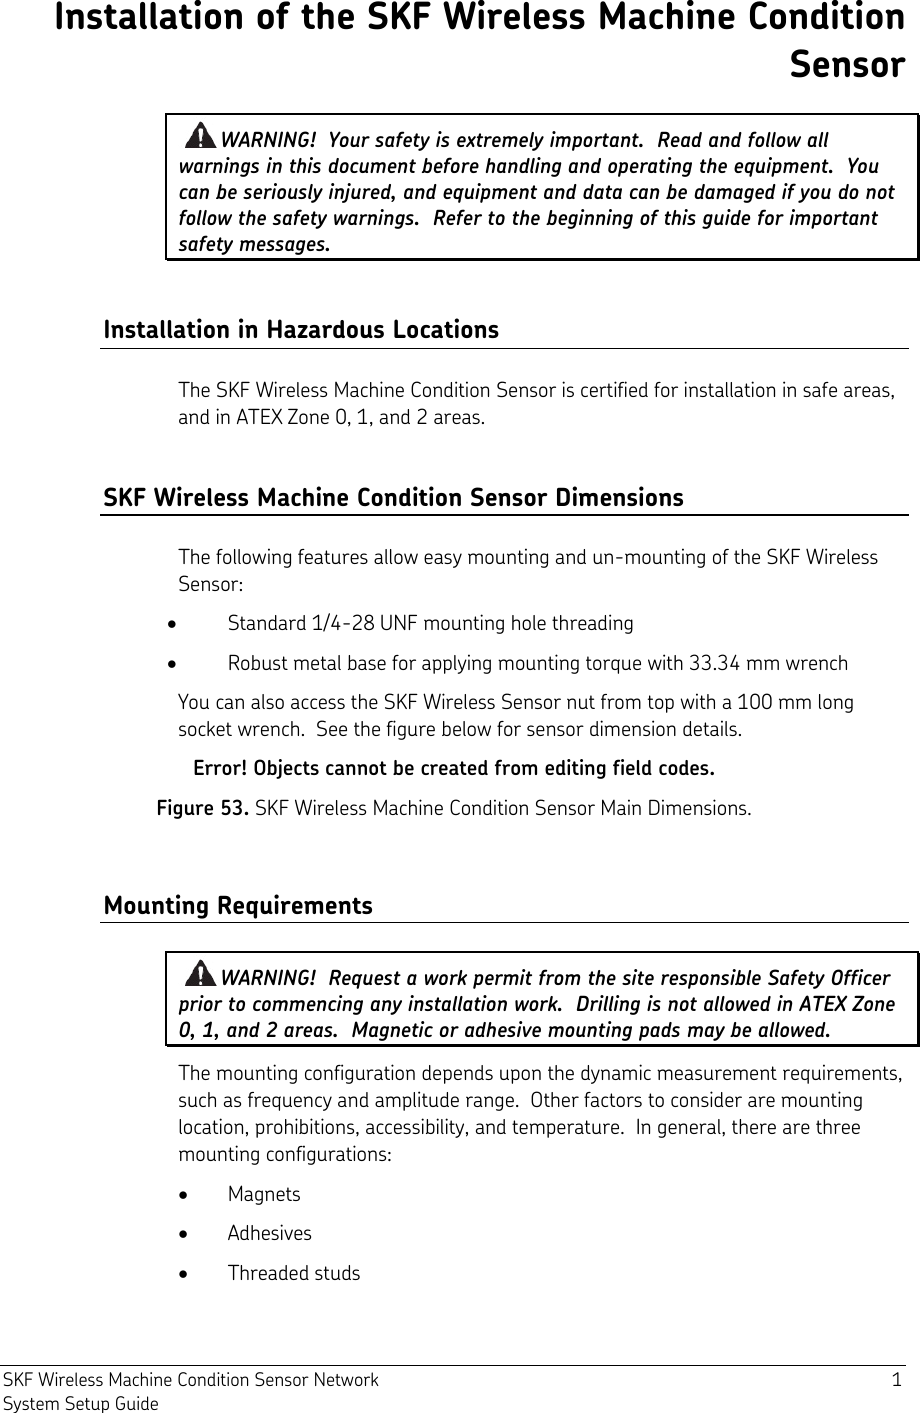  SKF Wireless Machine Condition Sensor Network  1 System Setup Guide Installation of the SKF Wireless Machine Condition Sensor WARNING!  Your safety is extremely important.  Read and follow all warnings in this document before handling and operating the equipment.  You can be seriously injured, and equipment and data can be damaged if you do not follow the safety warnings.  Refer to the beginning of this guide for important safety messages. Installation in Hazardous Locations The SKF Wireless Machine Condition Sensor is certified for installation in safe areas, and in ATEX Zone 0, 1, and 2 areas. SKF Wireless Machine Condition Sensor Dimensions The following features allow easy mounting and un-mounting of the SKF Wireless Sensor:  Standard 1/4-28 UNF mounting hole threading  Robust metal base for applying mounting torque with 33.34 mm wrench You can also access the SKF Wireless Sensor nut from top with a 100 mm long socket wrench.  See the figure below for sensor dimension details. Error! Objects cannot be created from editing field codes. Figure 53. SKF Wireless Machine Condition Sensor Main Dimensions. Mounting Requirements WARNING!  Request a work permit from the site responsible Safety Officer prior to commencing any installation work.  Drilling is not allowed in ATEX Zone 0, 1, and 2 areas.  Magnetic or adhesive mounting pads may be allowed. The mounting configuration depends upon the dynamic measurement requirements, such as frequency and amplitude range.  Other factors to consider are mounting location, prohibitions, accessibility, and temperature.  In general, there are three mounting configurations:  Magnets  Adhesives  Threaded studs 